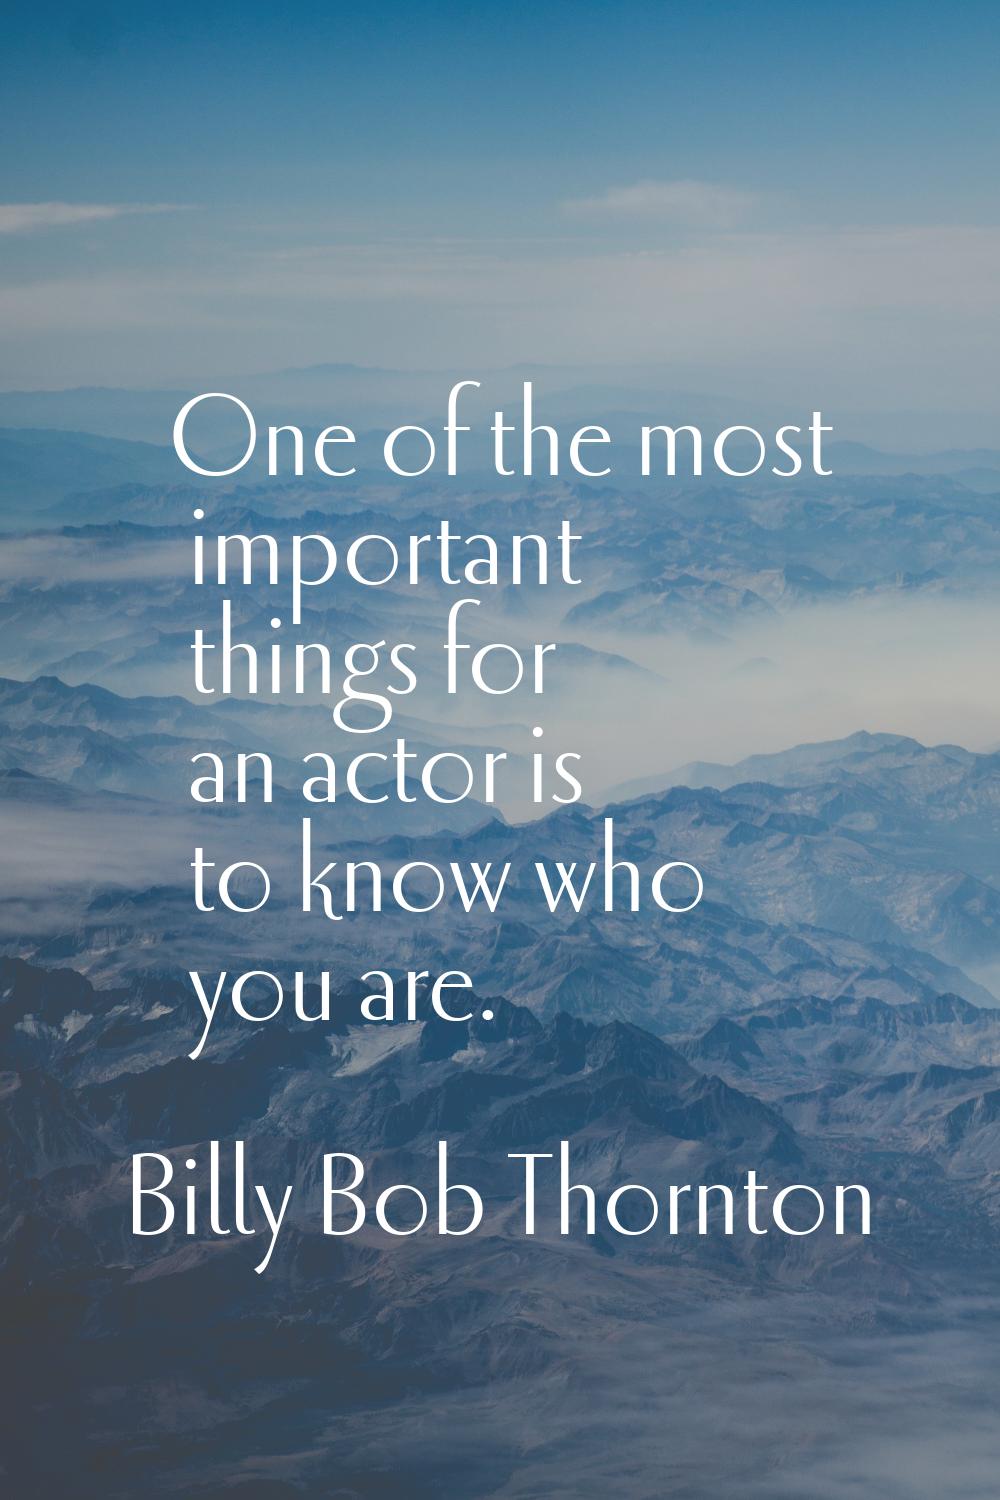 One of the most important things for an actor is to know who you are.